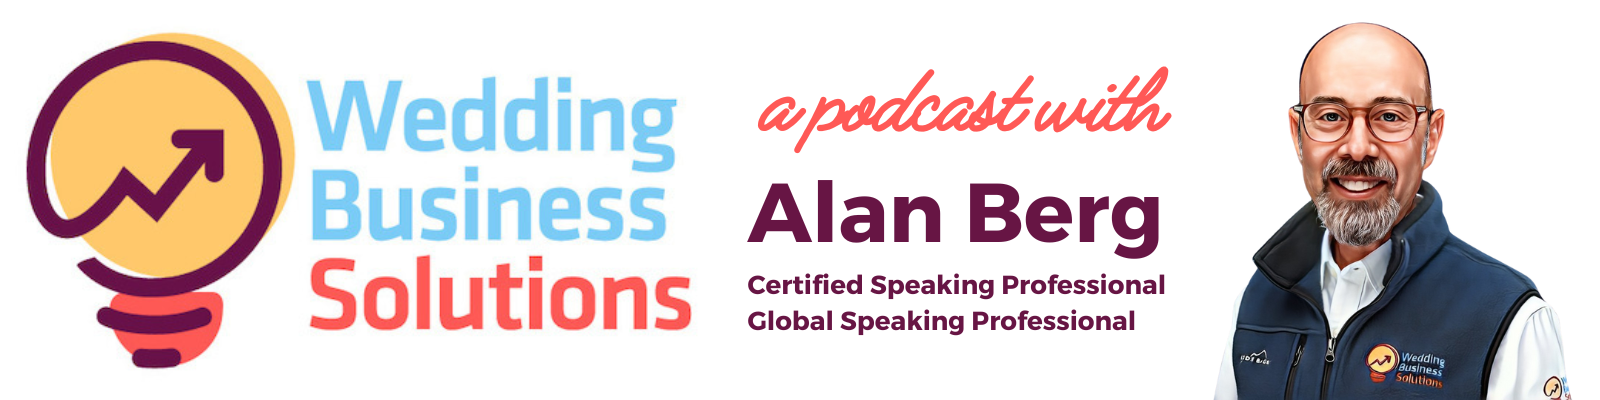 Wedding Business Solutions Podcast with Alan Berg CSP, Global Speaking Fellow